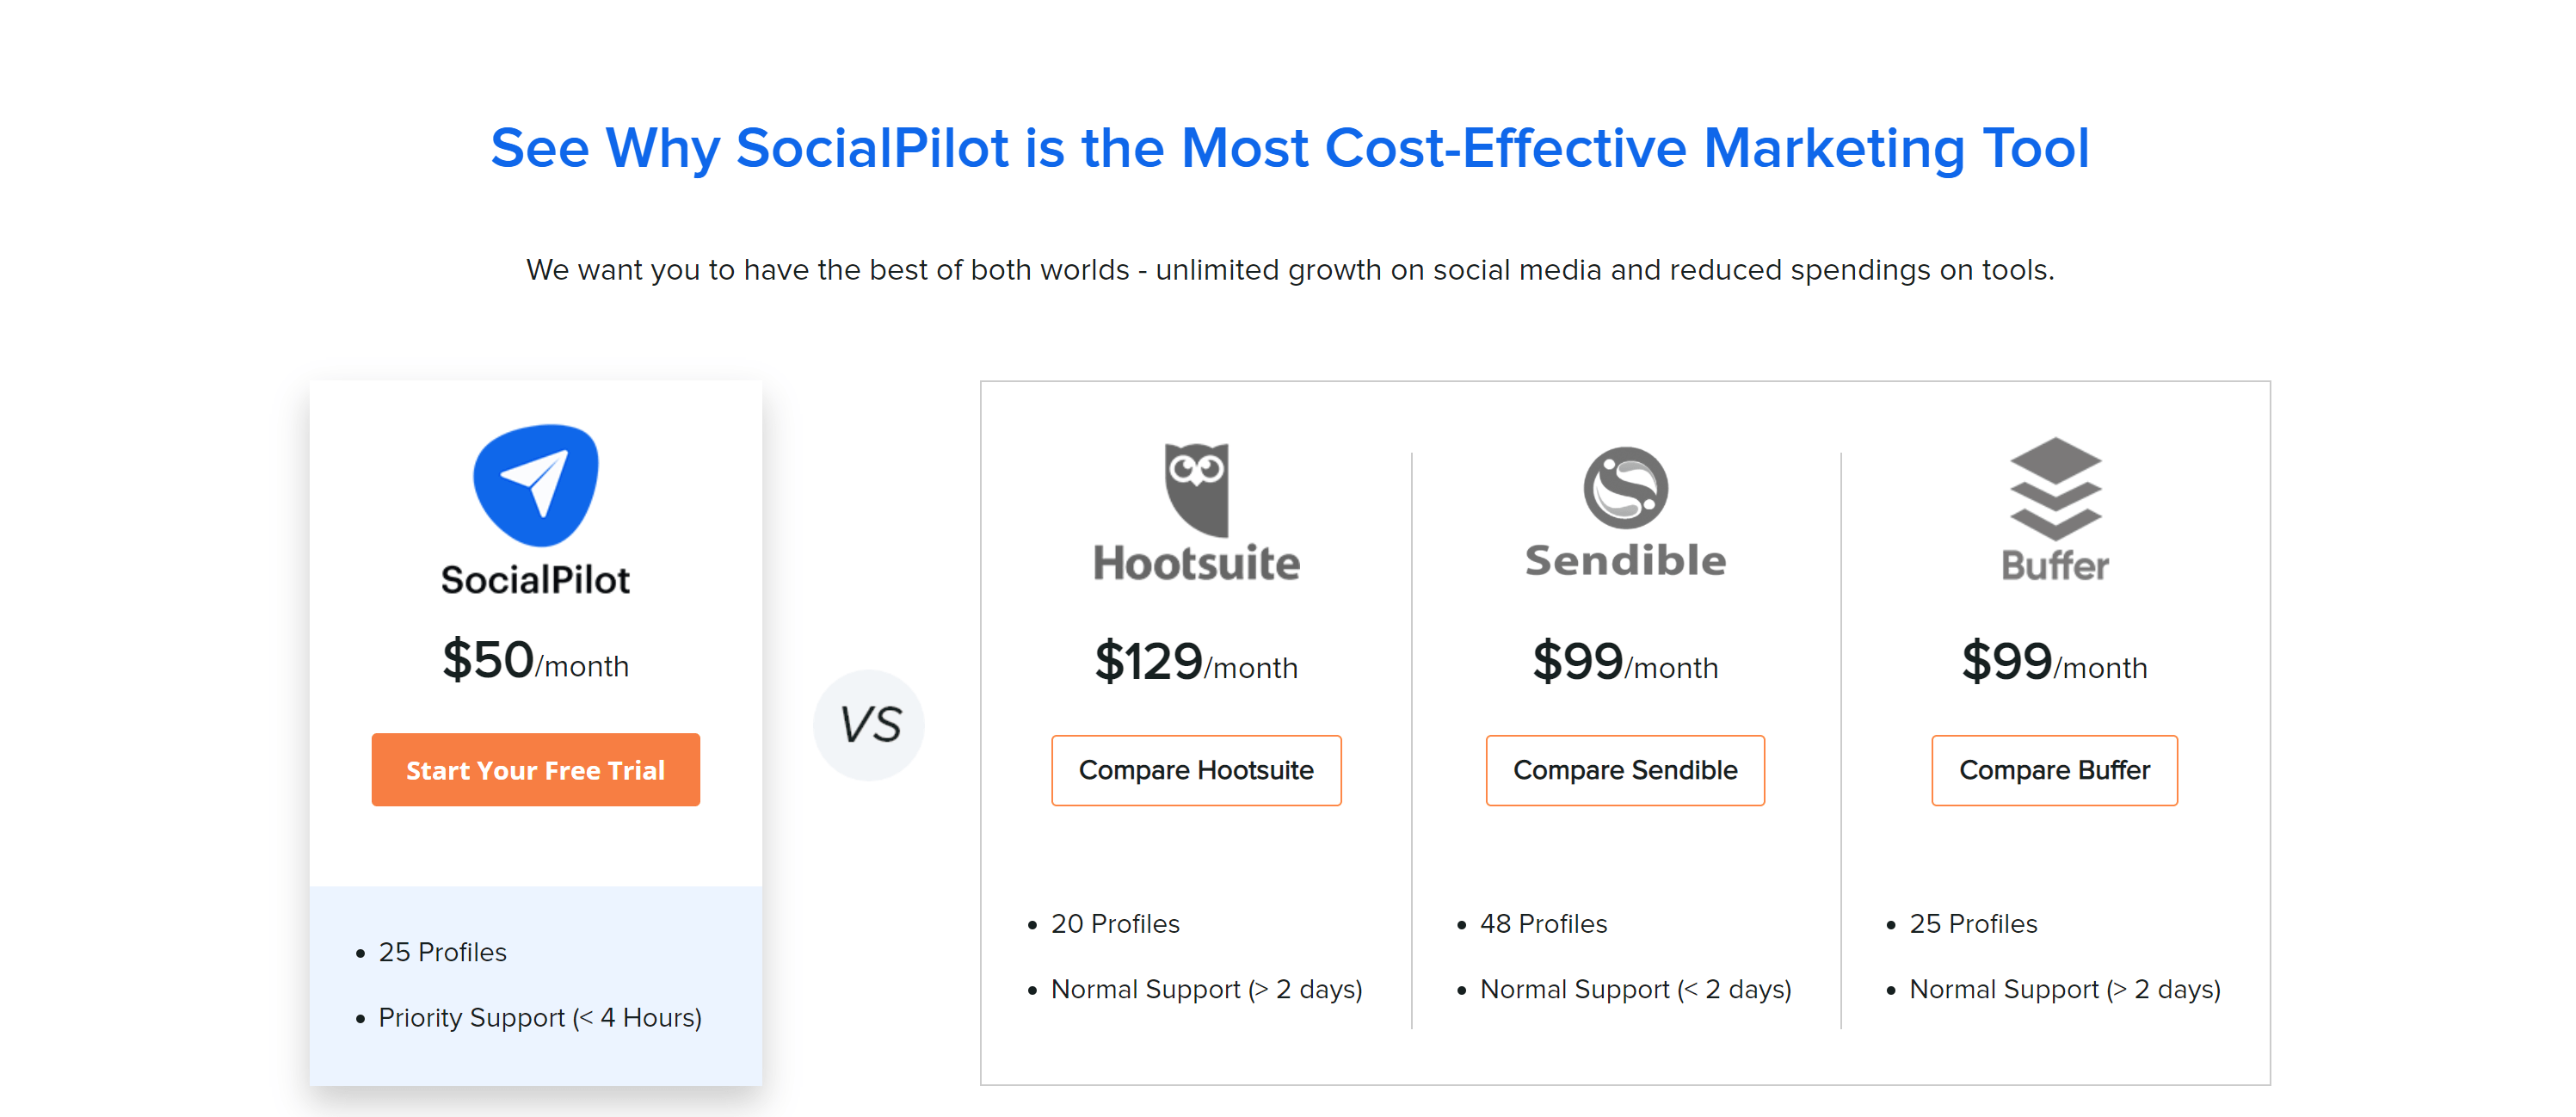 SoicalPilot Review-Why socialpilot is better than others